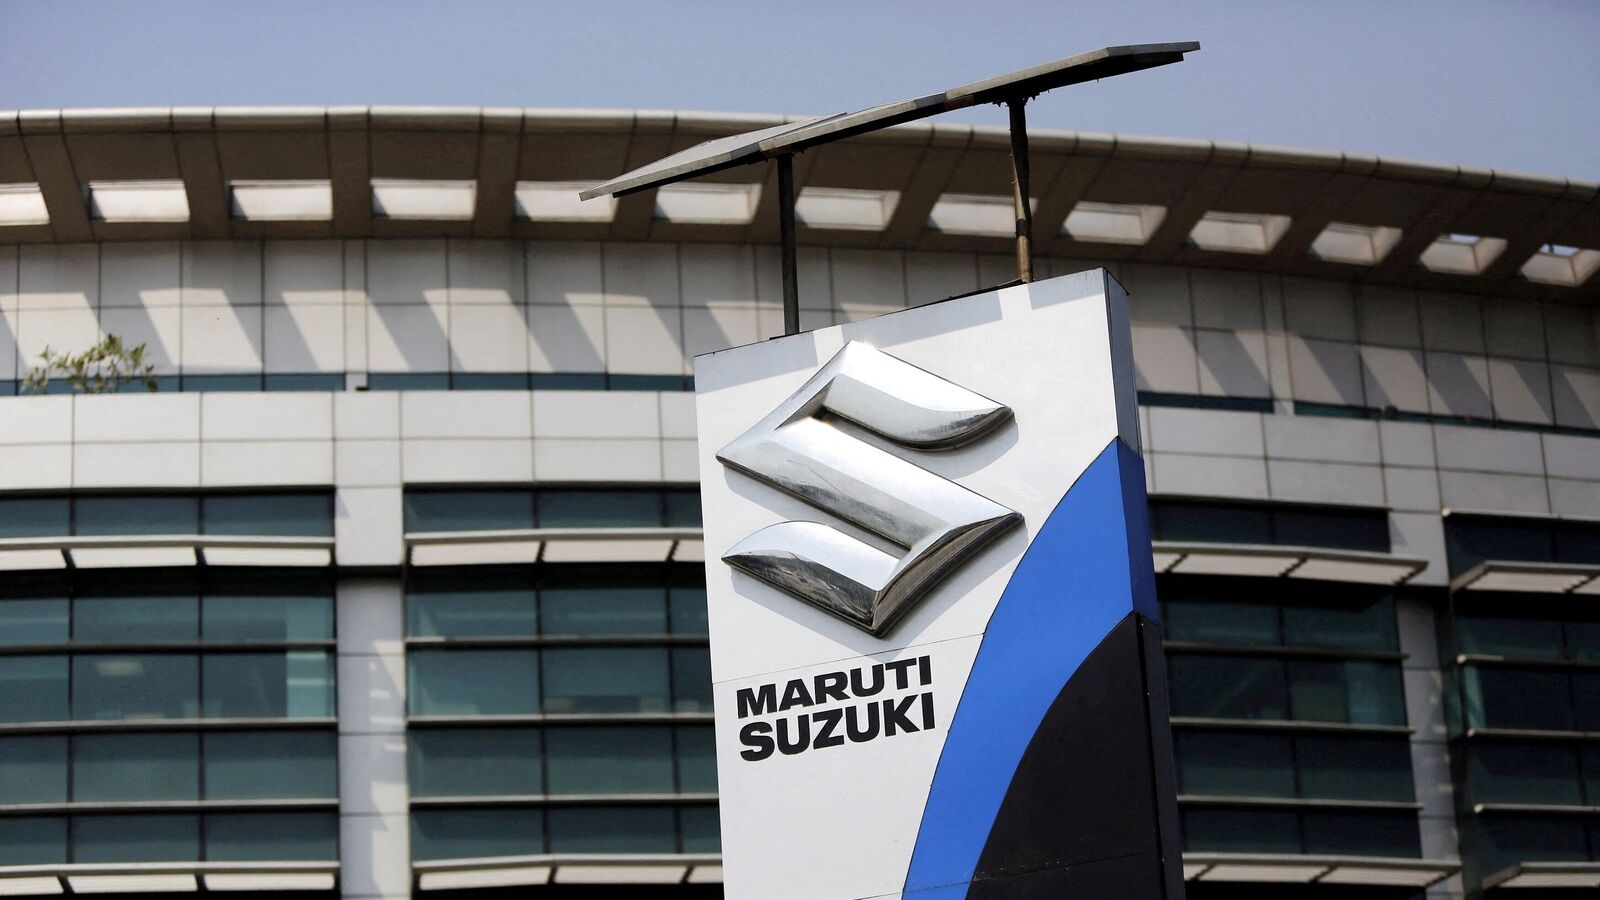 Maruti Suzuki hikes prices across models by 0.45% effective today